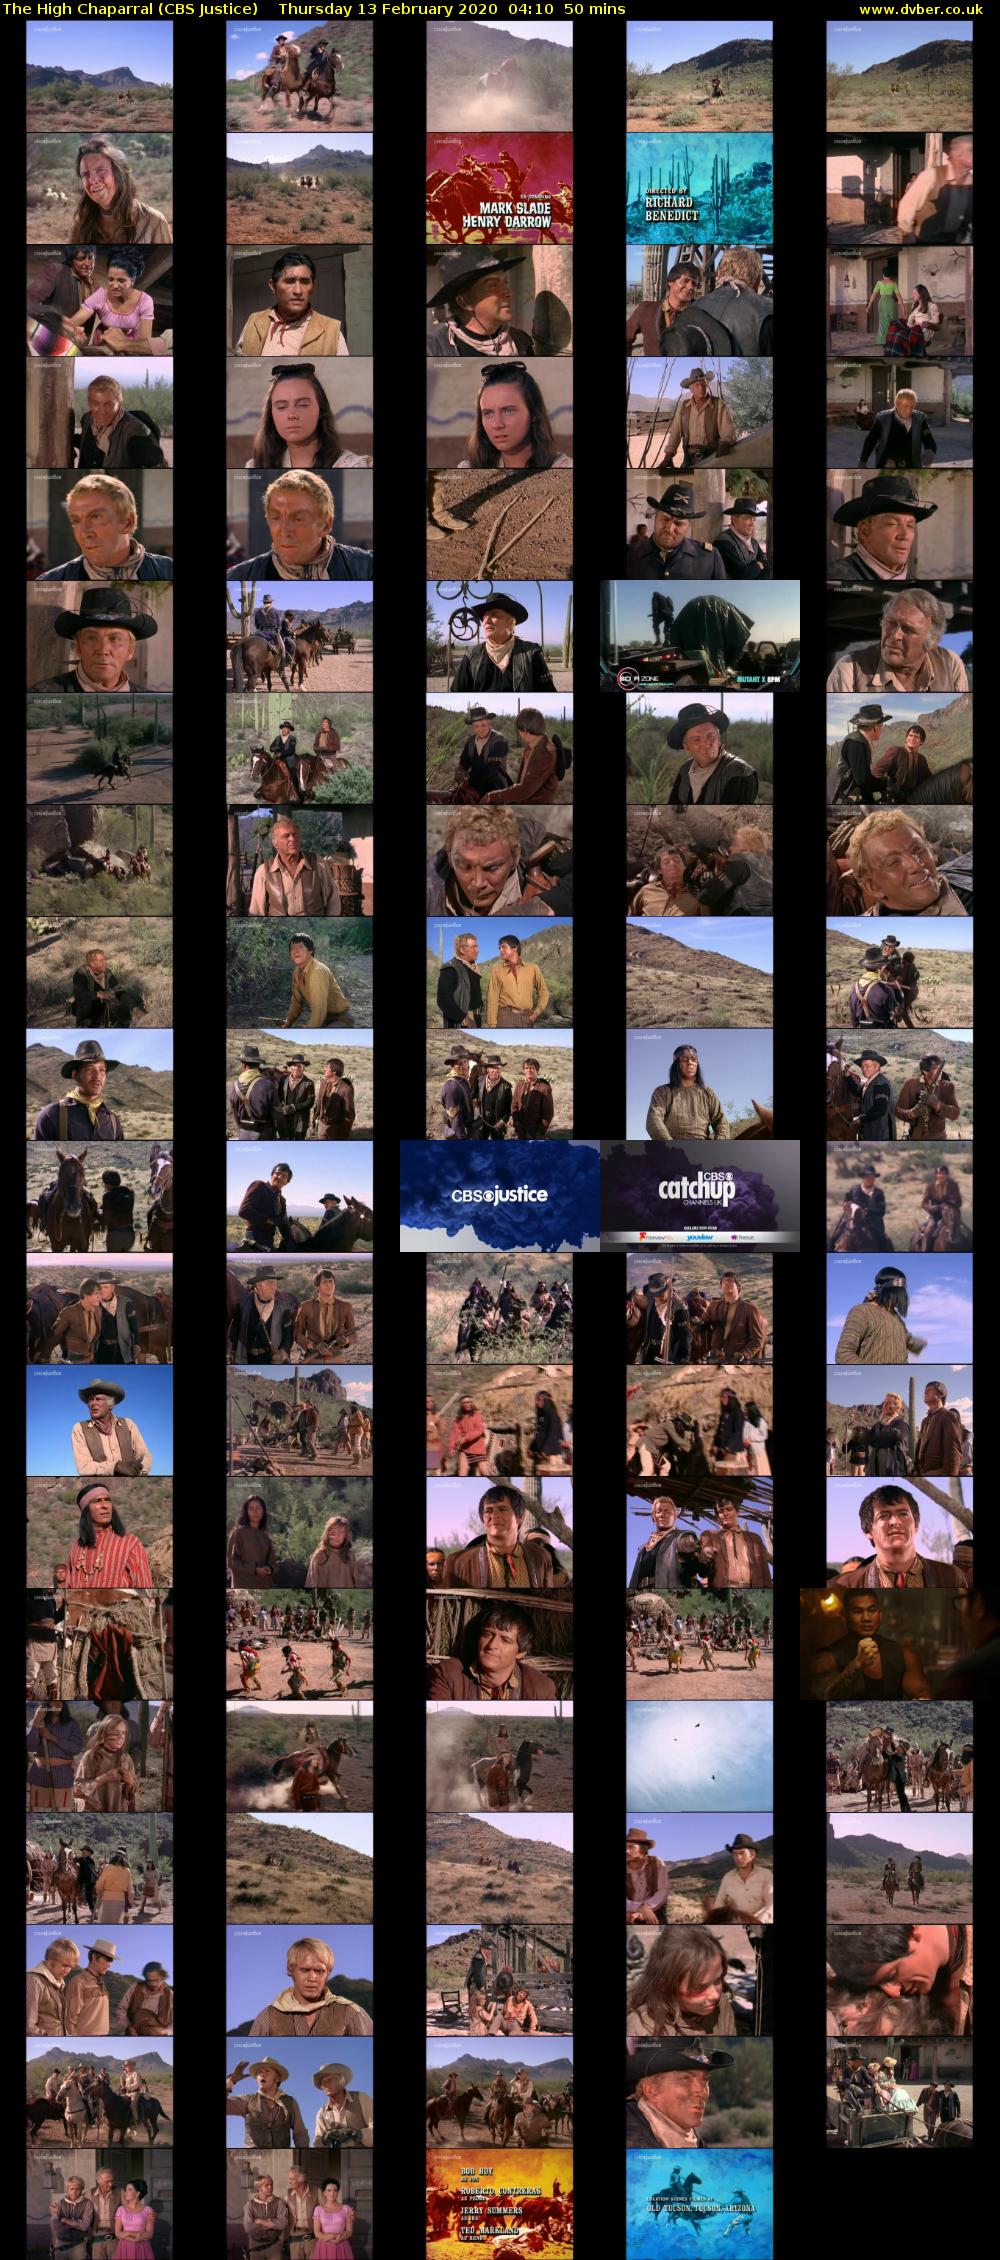 The High Chaparral (CBS Justice) Thursday 13 February 2020 04:10 - 05:00